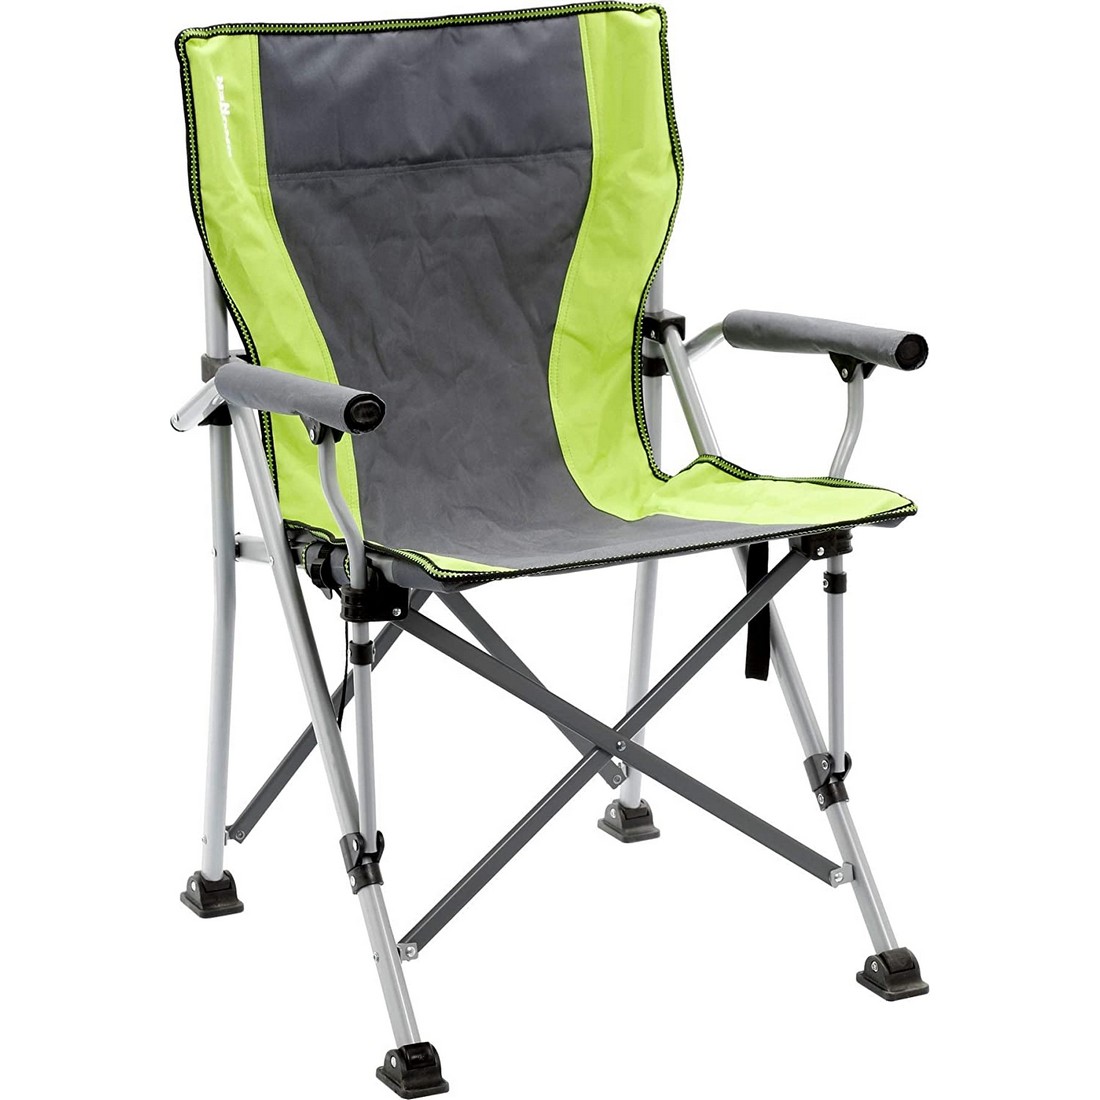 raptor gray and green chair - max load: 110 kg - measurements: 51 x 44 x h48/90 cm